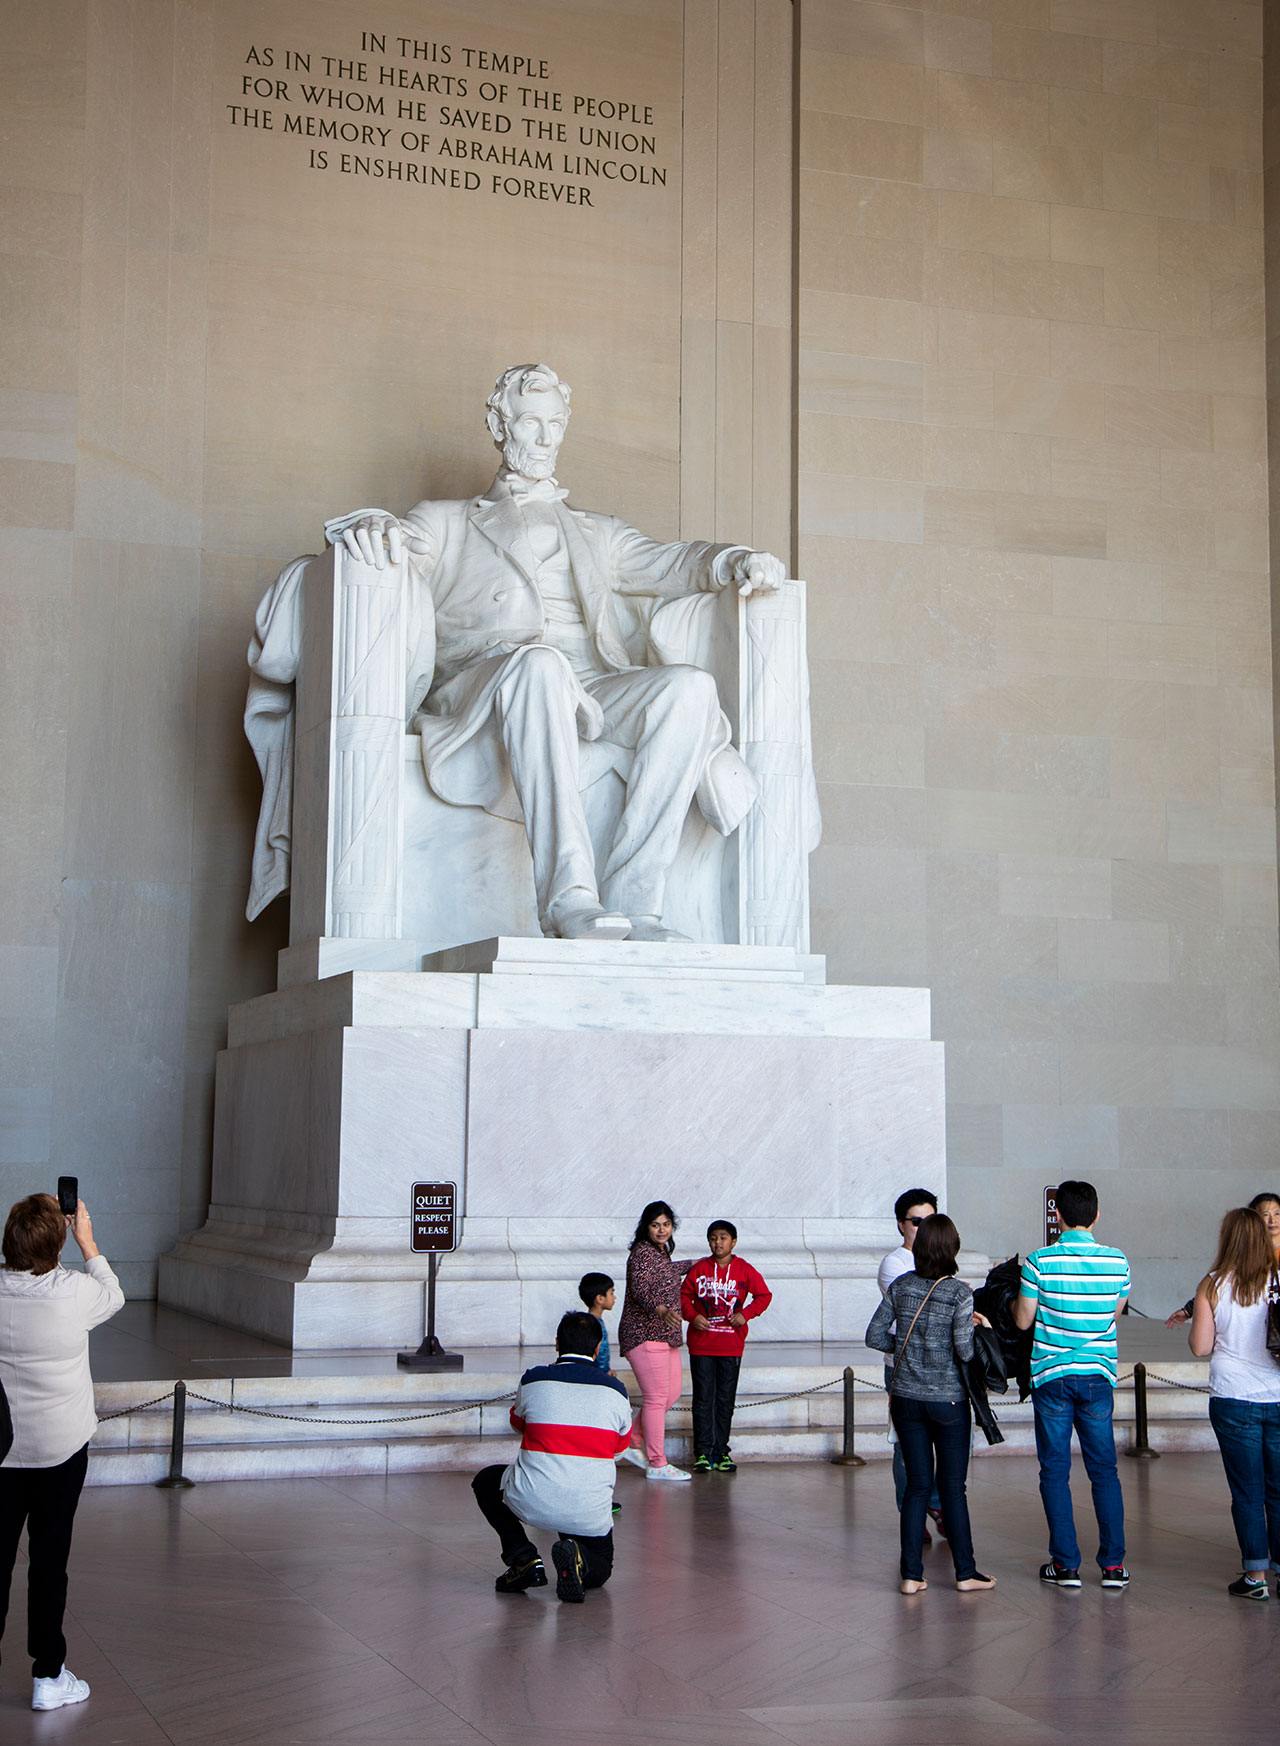 A statue of Abraham Lincoln at the Lincoln Memorial. People walk and take pictures around it.